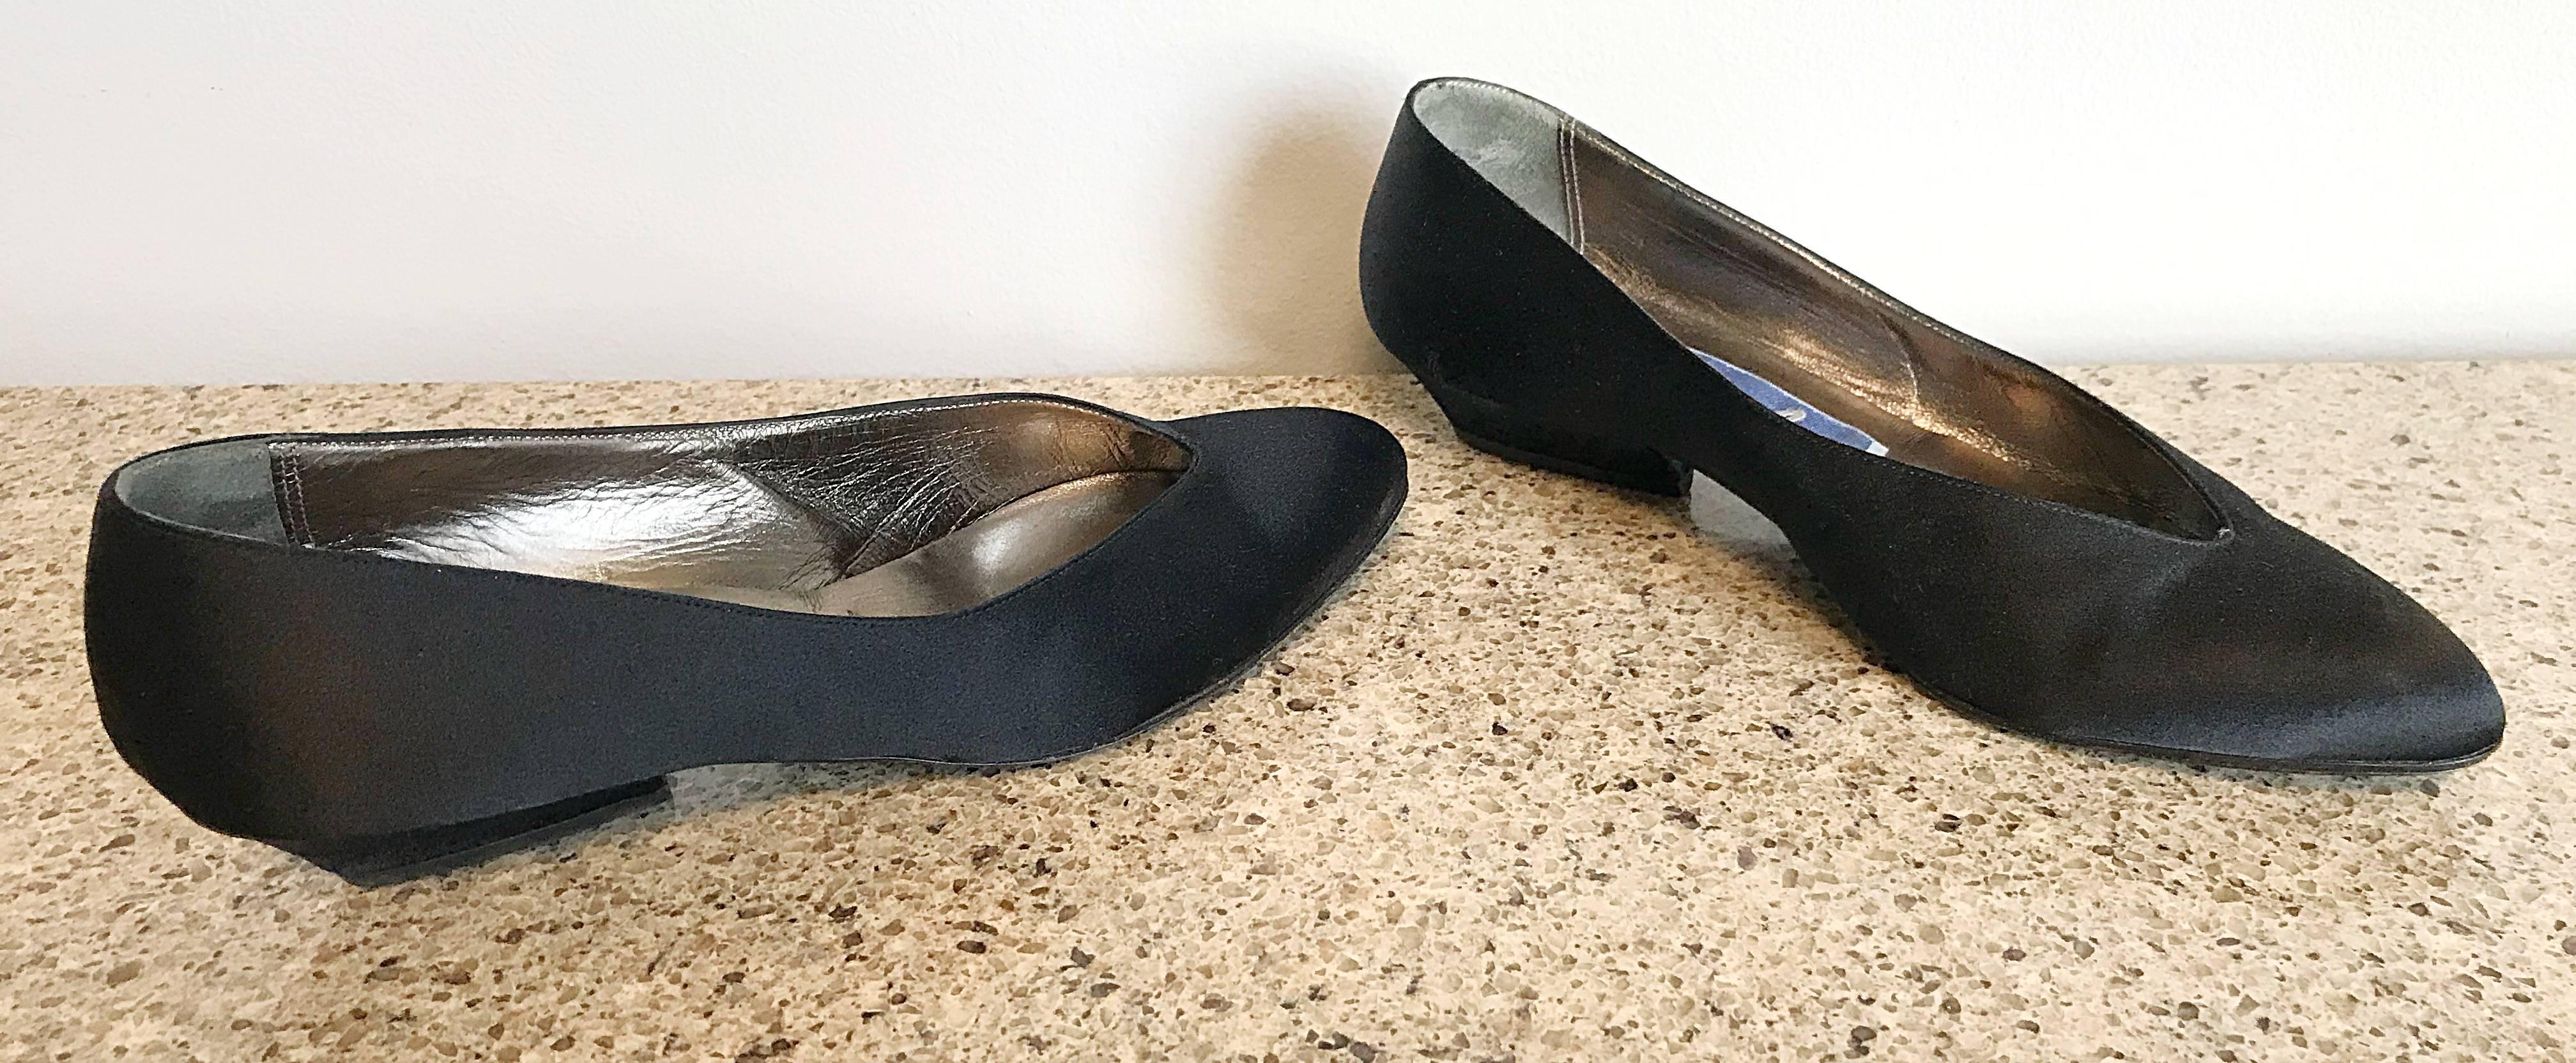 Avant Garde vintage 80s black silk satin flats! The perfect comfortable and stylish pair of shoes. Features a pointed curve, with an angular heel. Can easily be dressed up or down. Great with shorts, jeans, a skirt, a dress, or a suit. In great